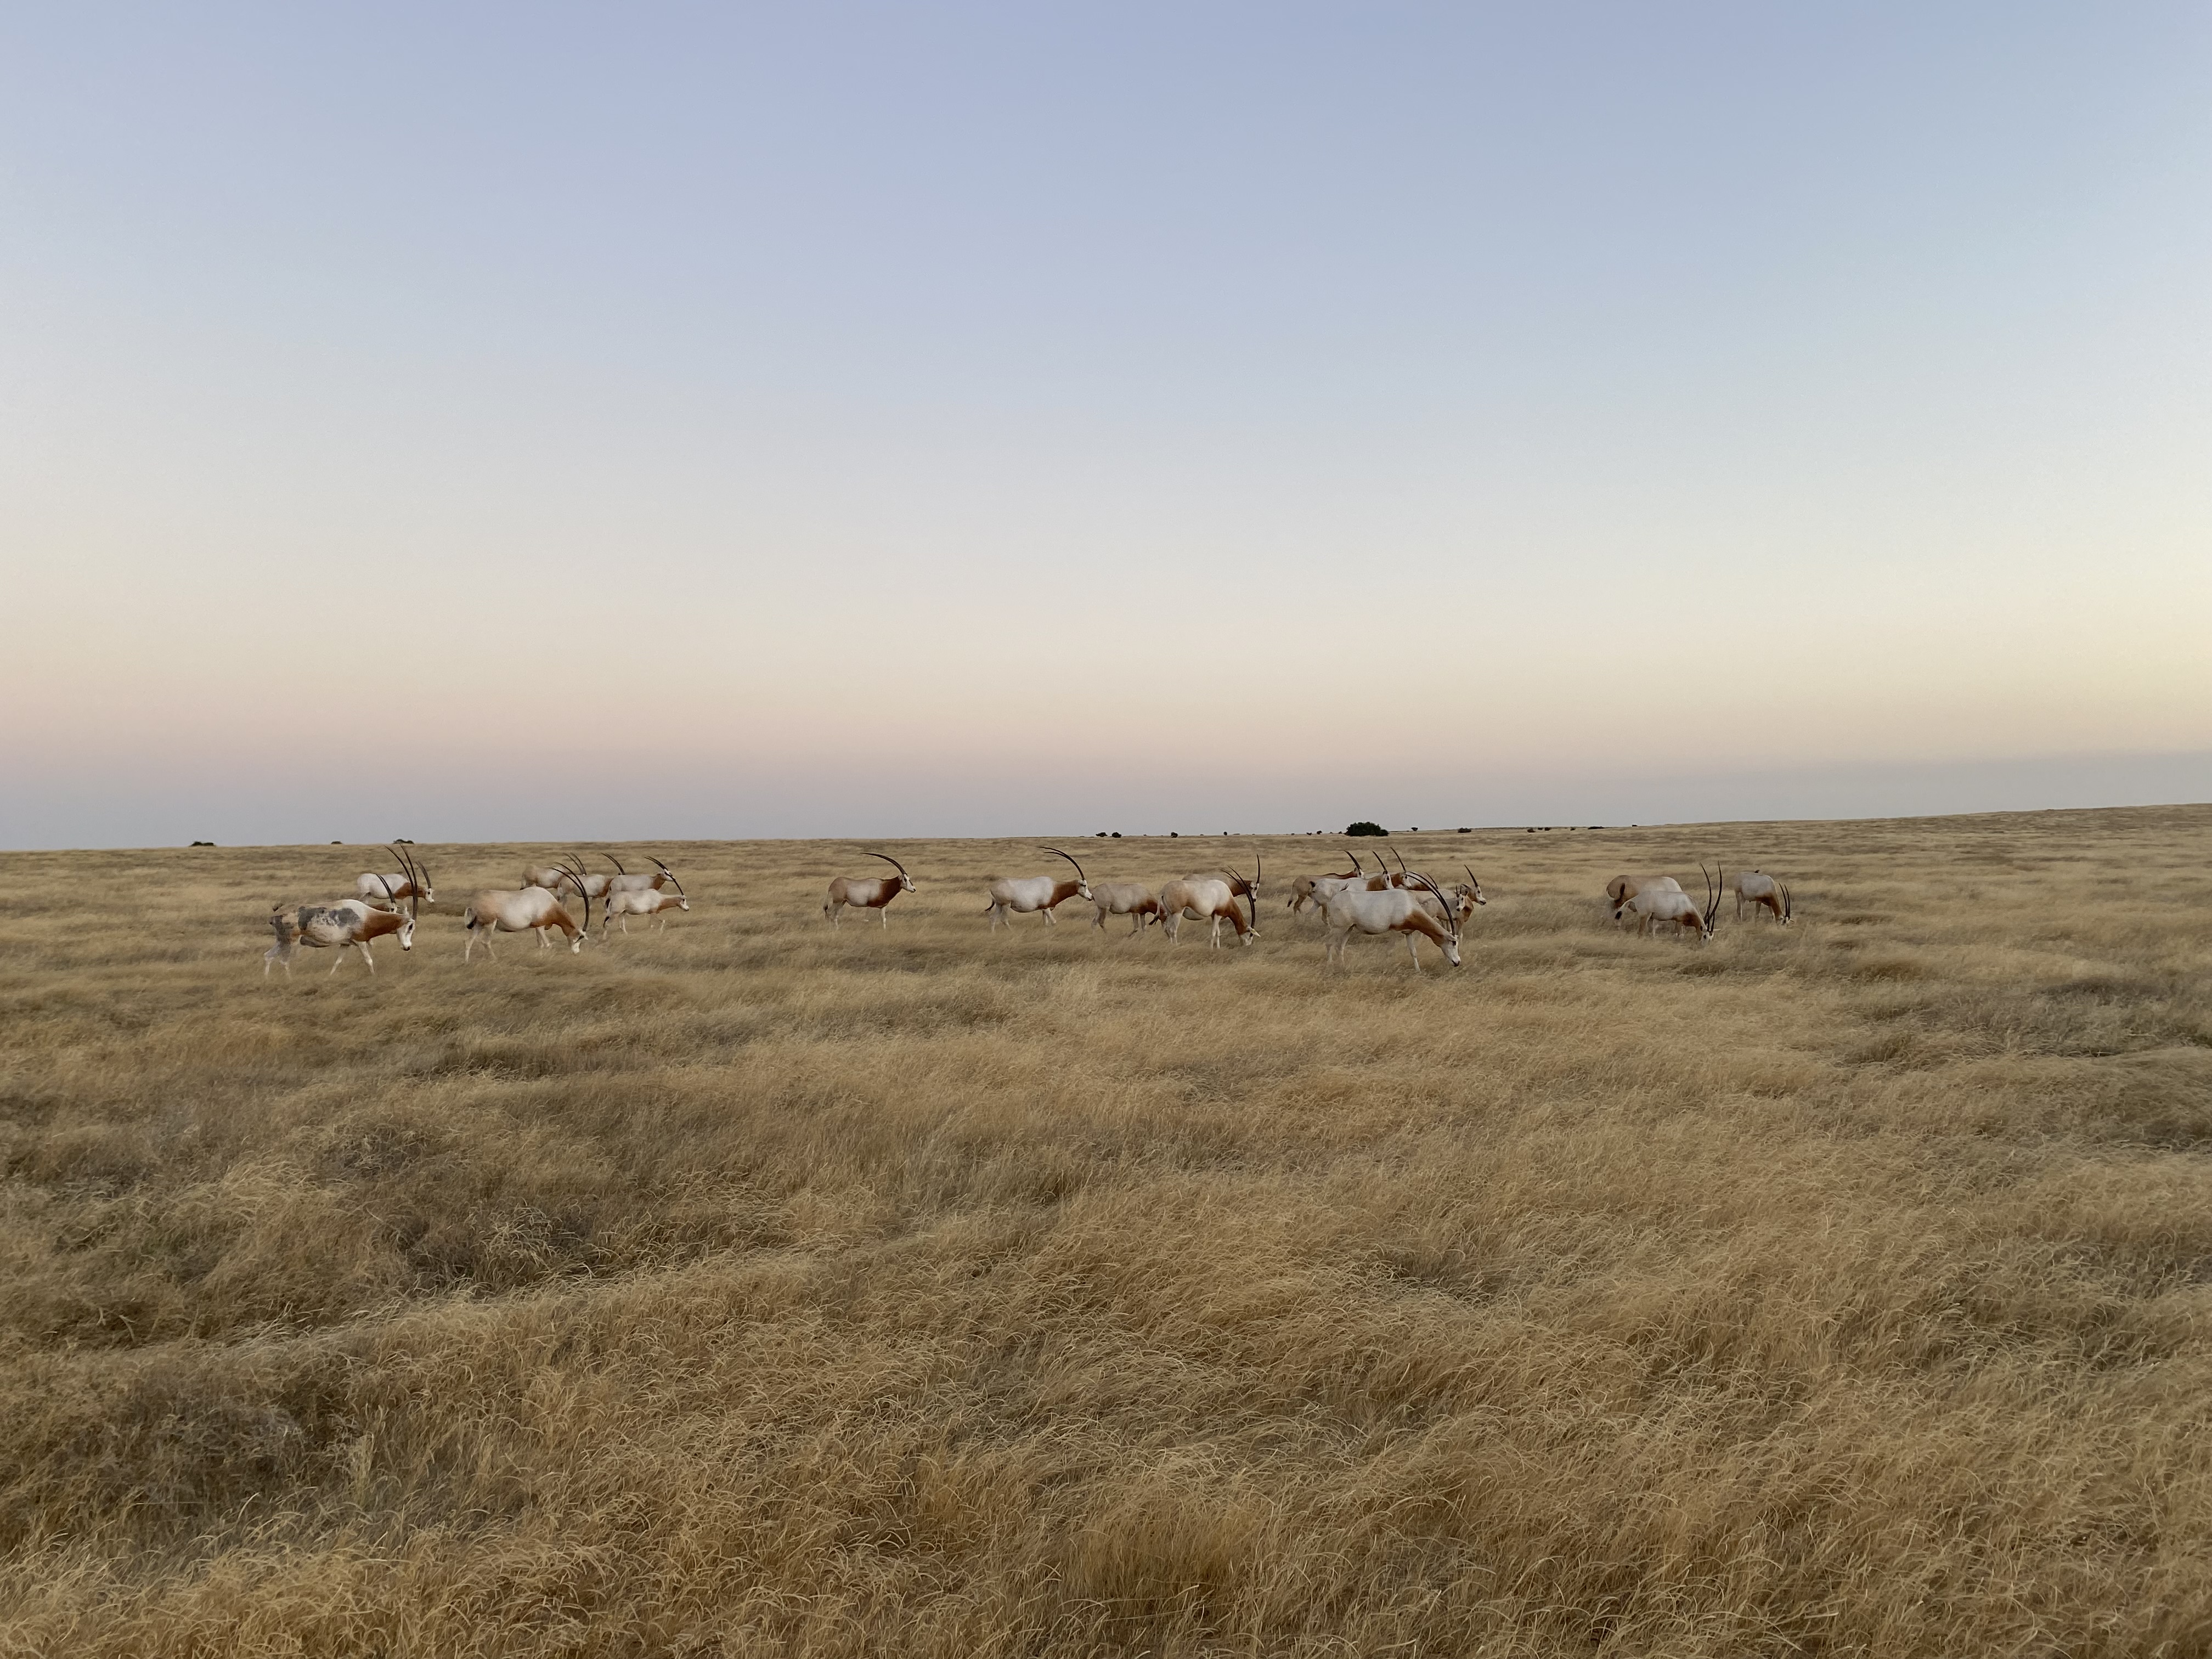 Photo of a herd of scimitar horned oryx on a grassy plain in Chad. The landscape is flat and more than a dozen oryx can be seen.